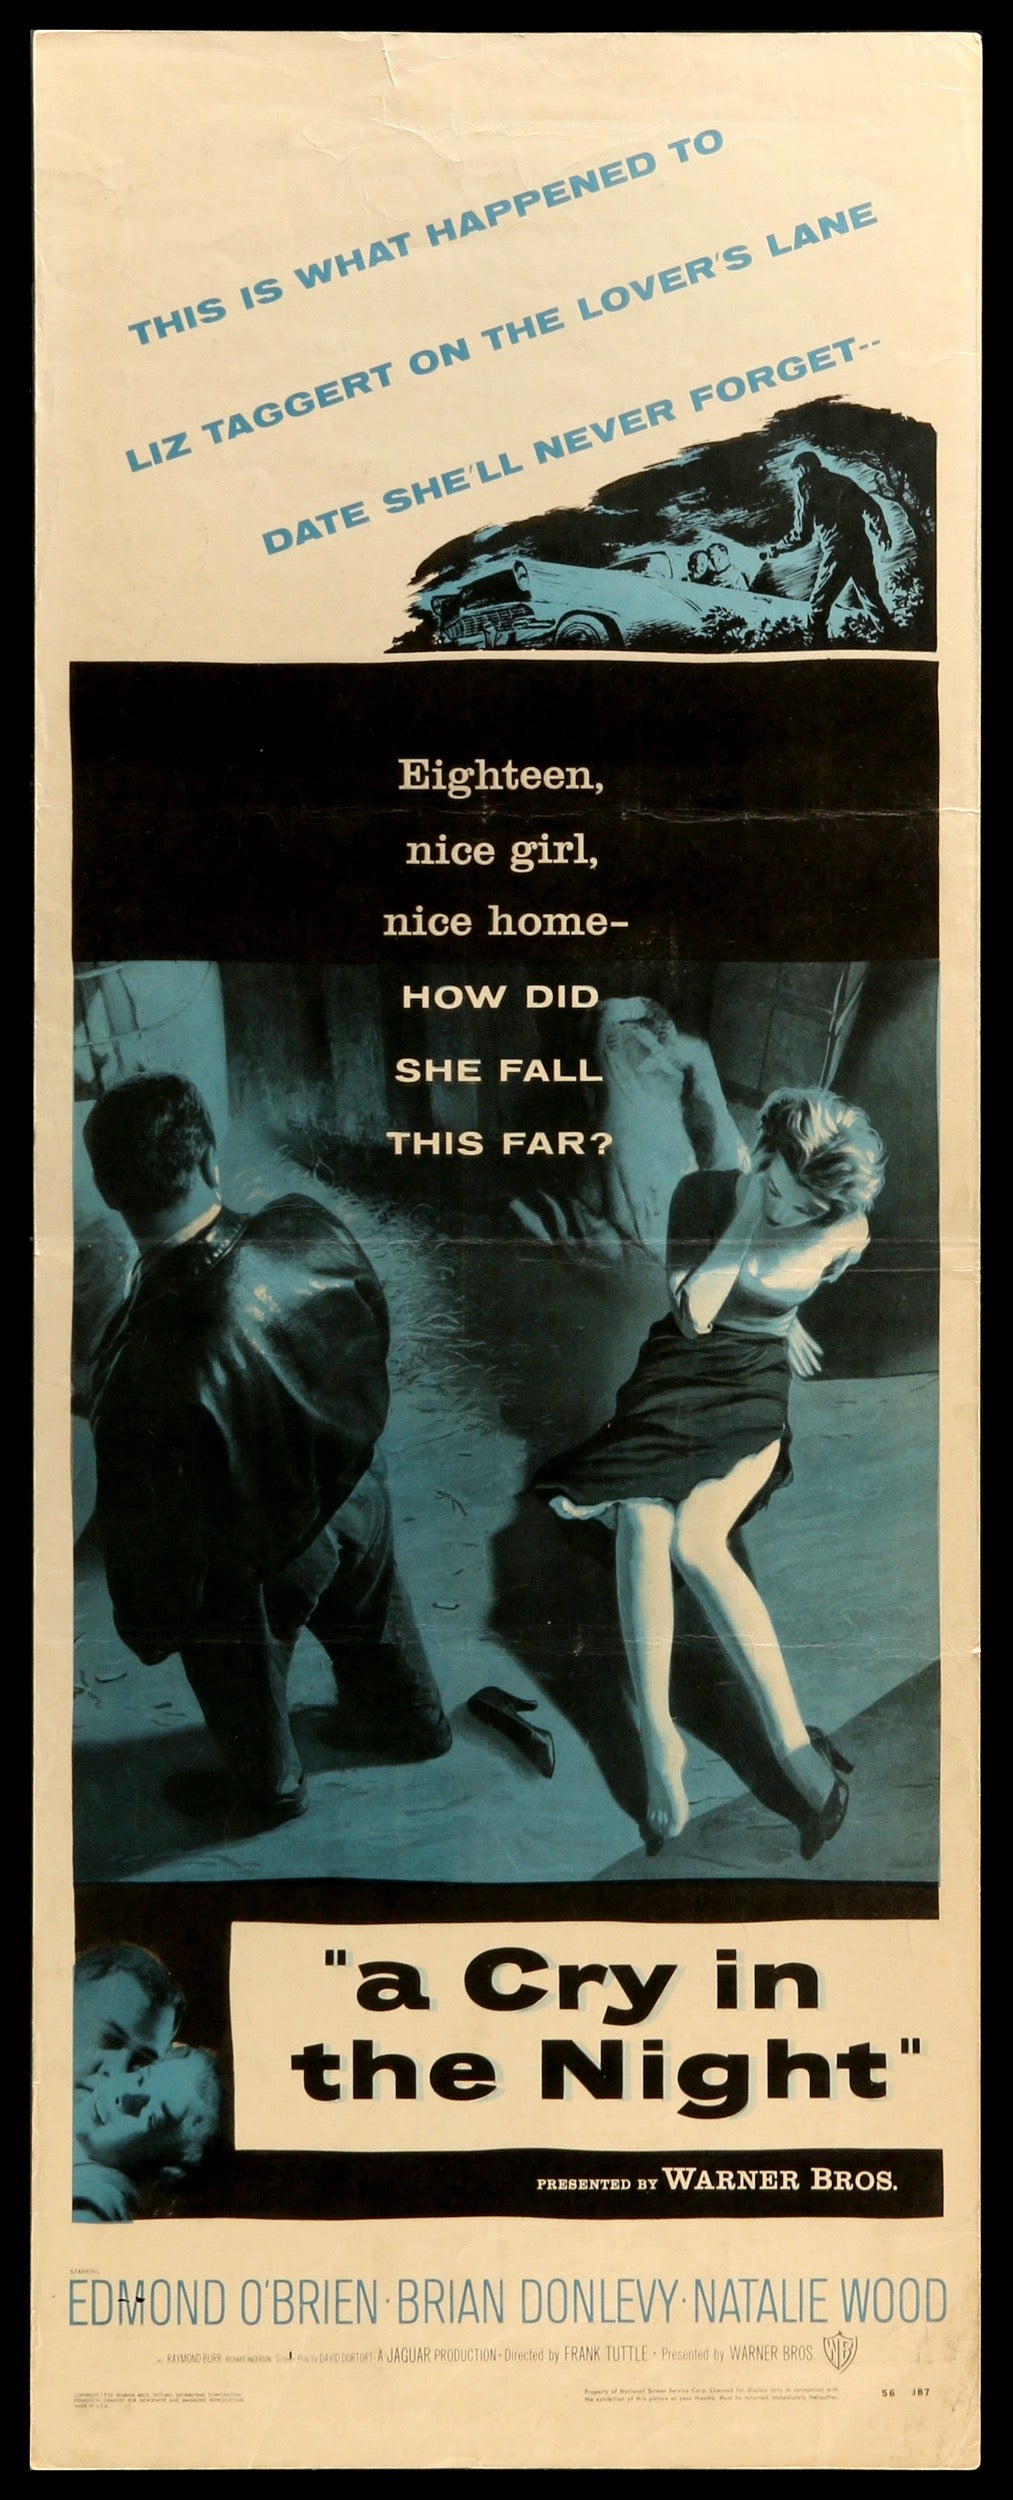 Cry in the Night (1956) original movie poster for sale at Original Film Art